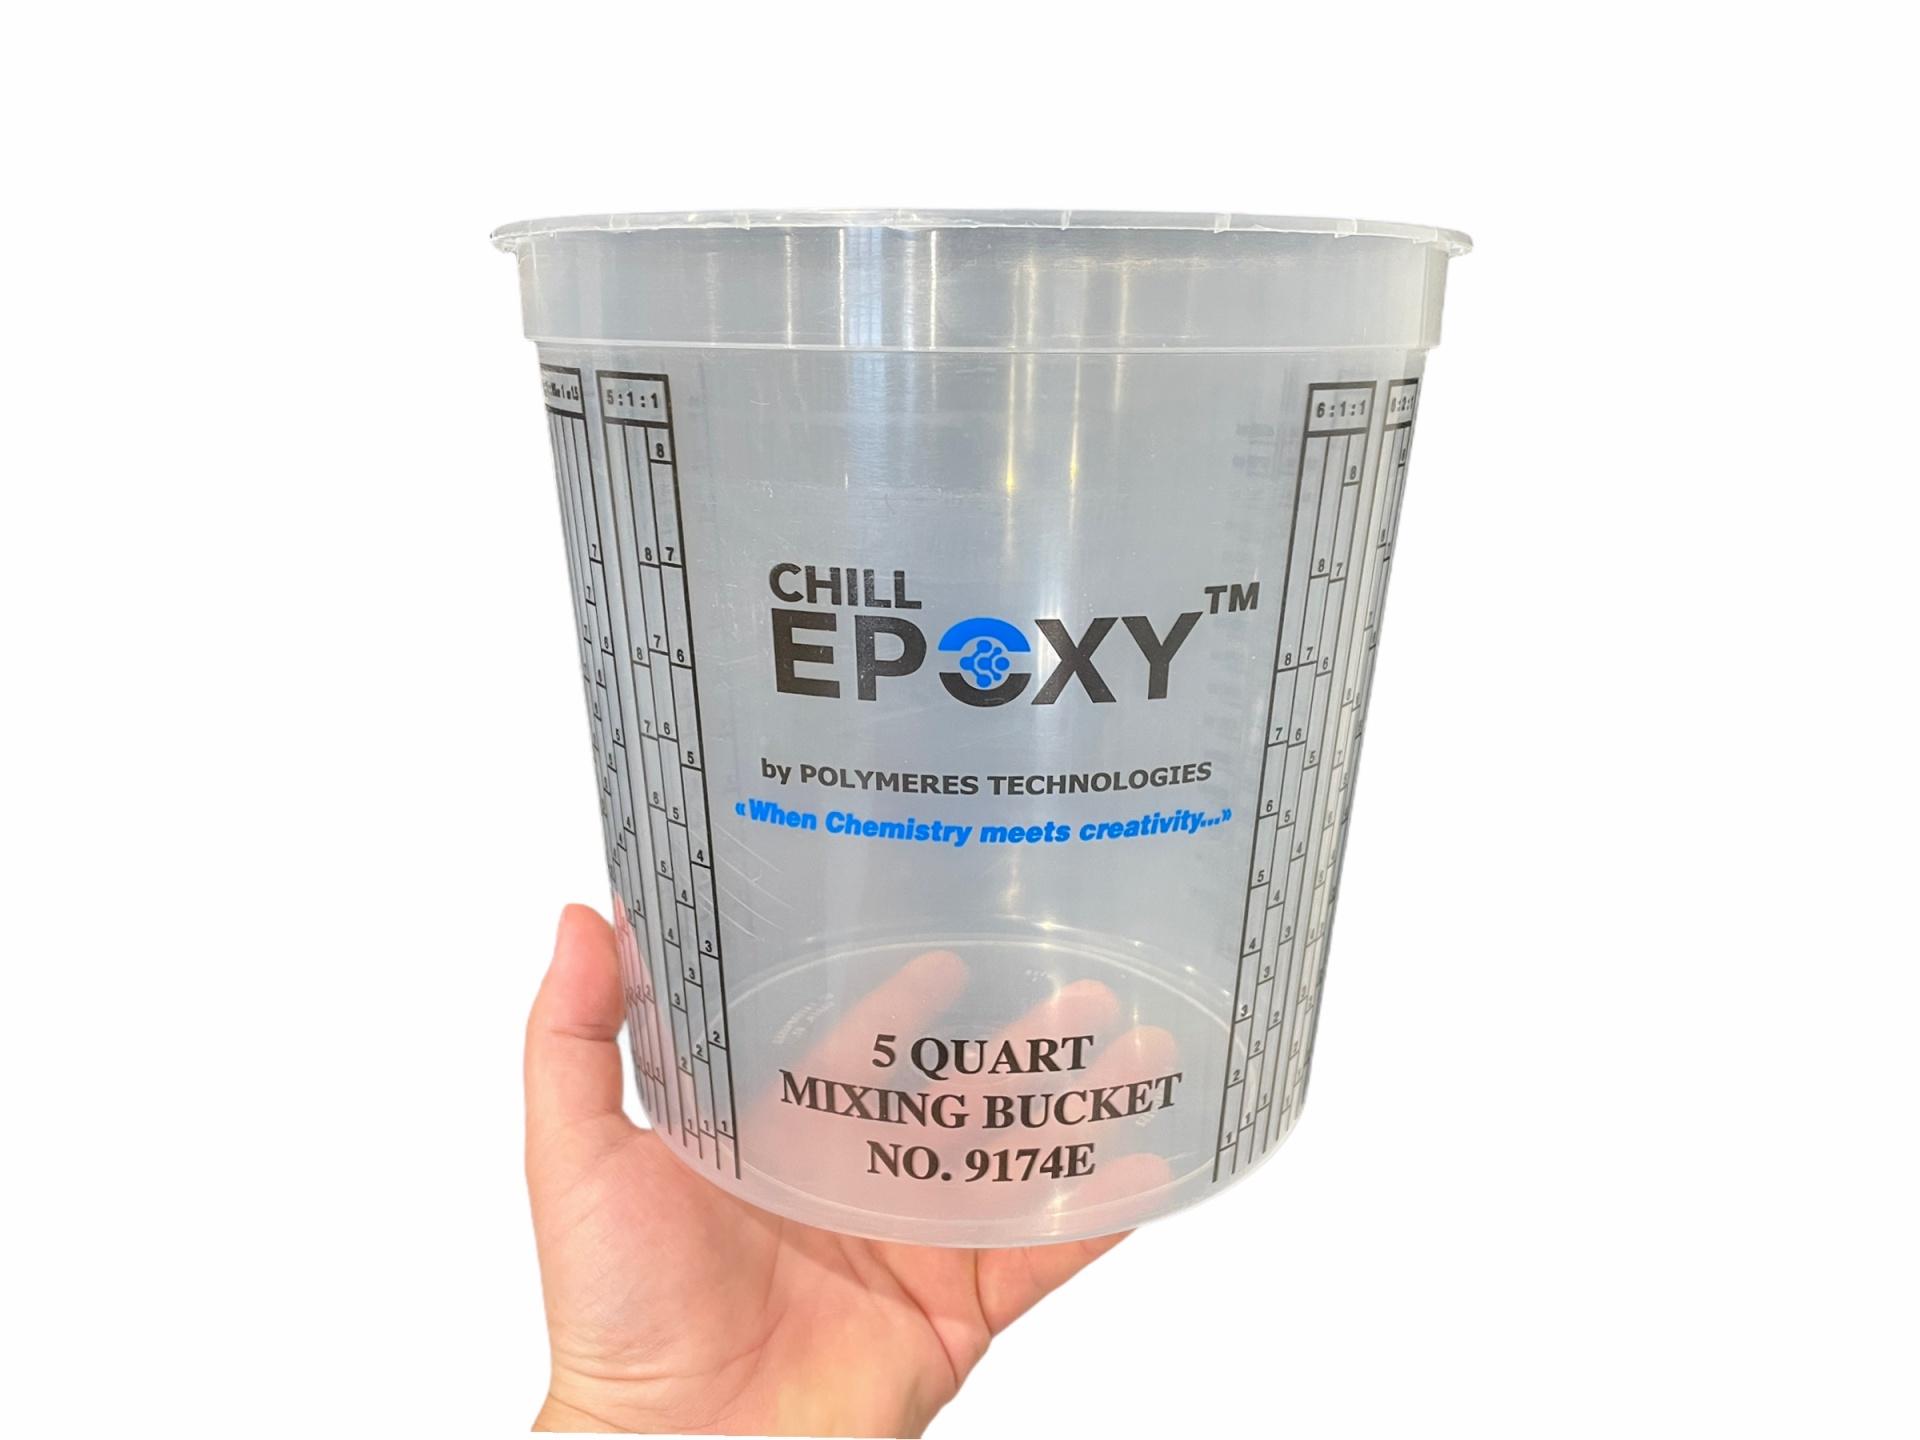 Epoxy Mixing Ratio Cups (1 Pint - Pack of 12) - Mix DIY Countertop Epoxy Resin Kits in Disposable Calibrated Mixing Cups! Ratios Are 1:1, 2:1, and 3